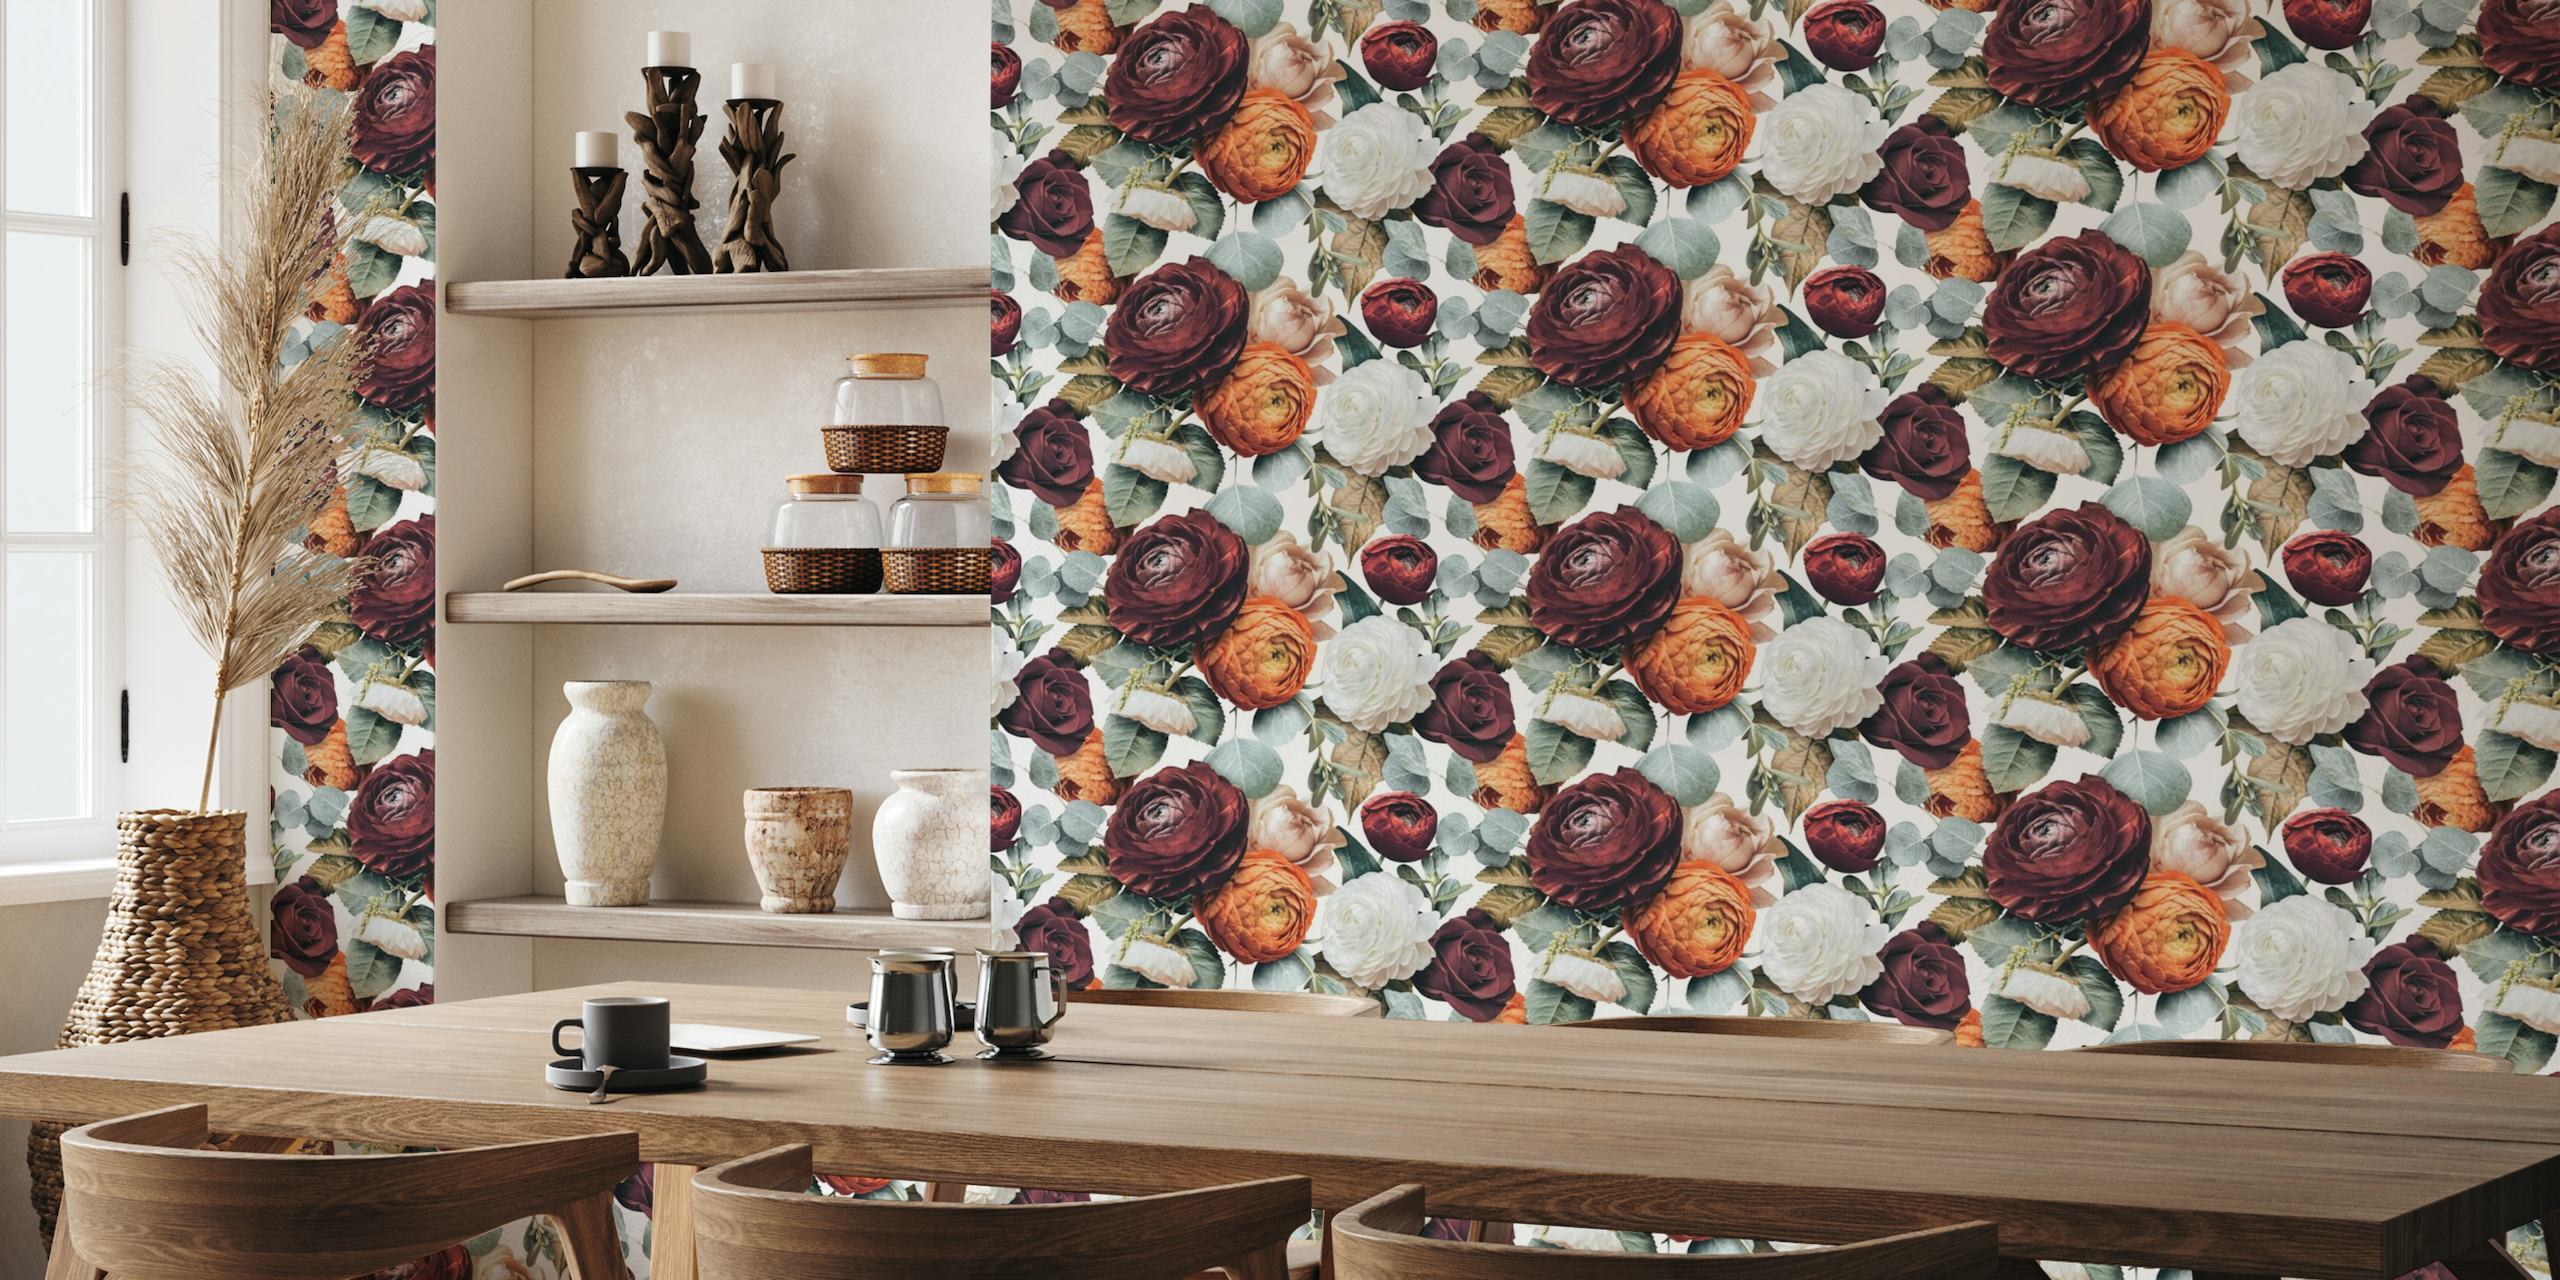 Cloves Daylight floral wall mural with roses in soft daylight shades